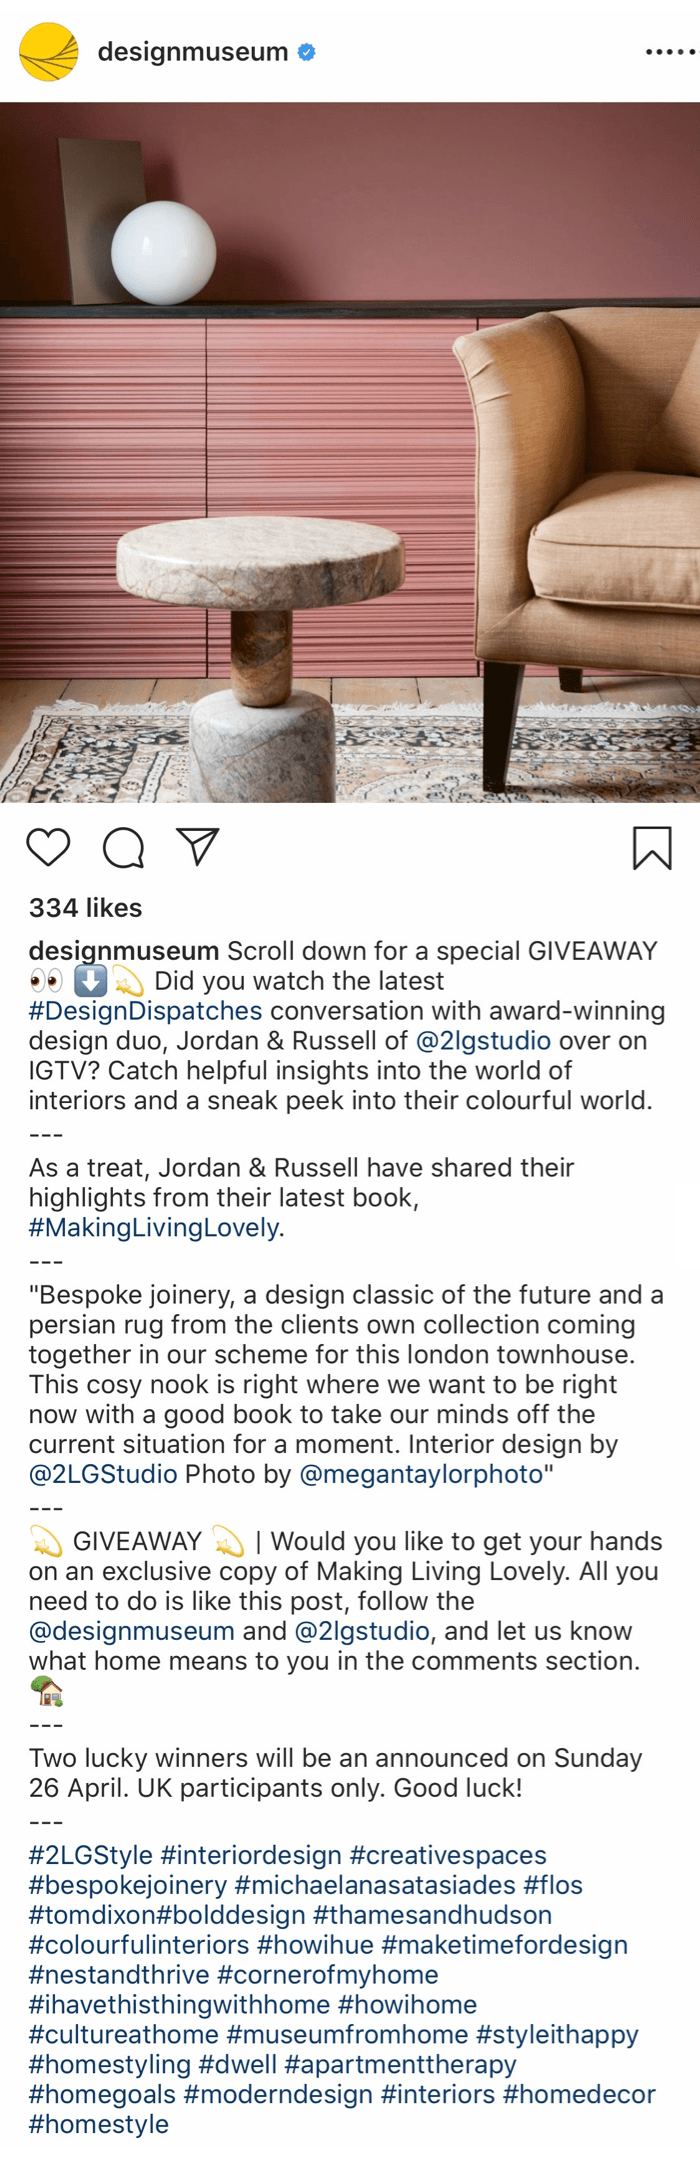 Instagram giveaway post featured by @designmuseum